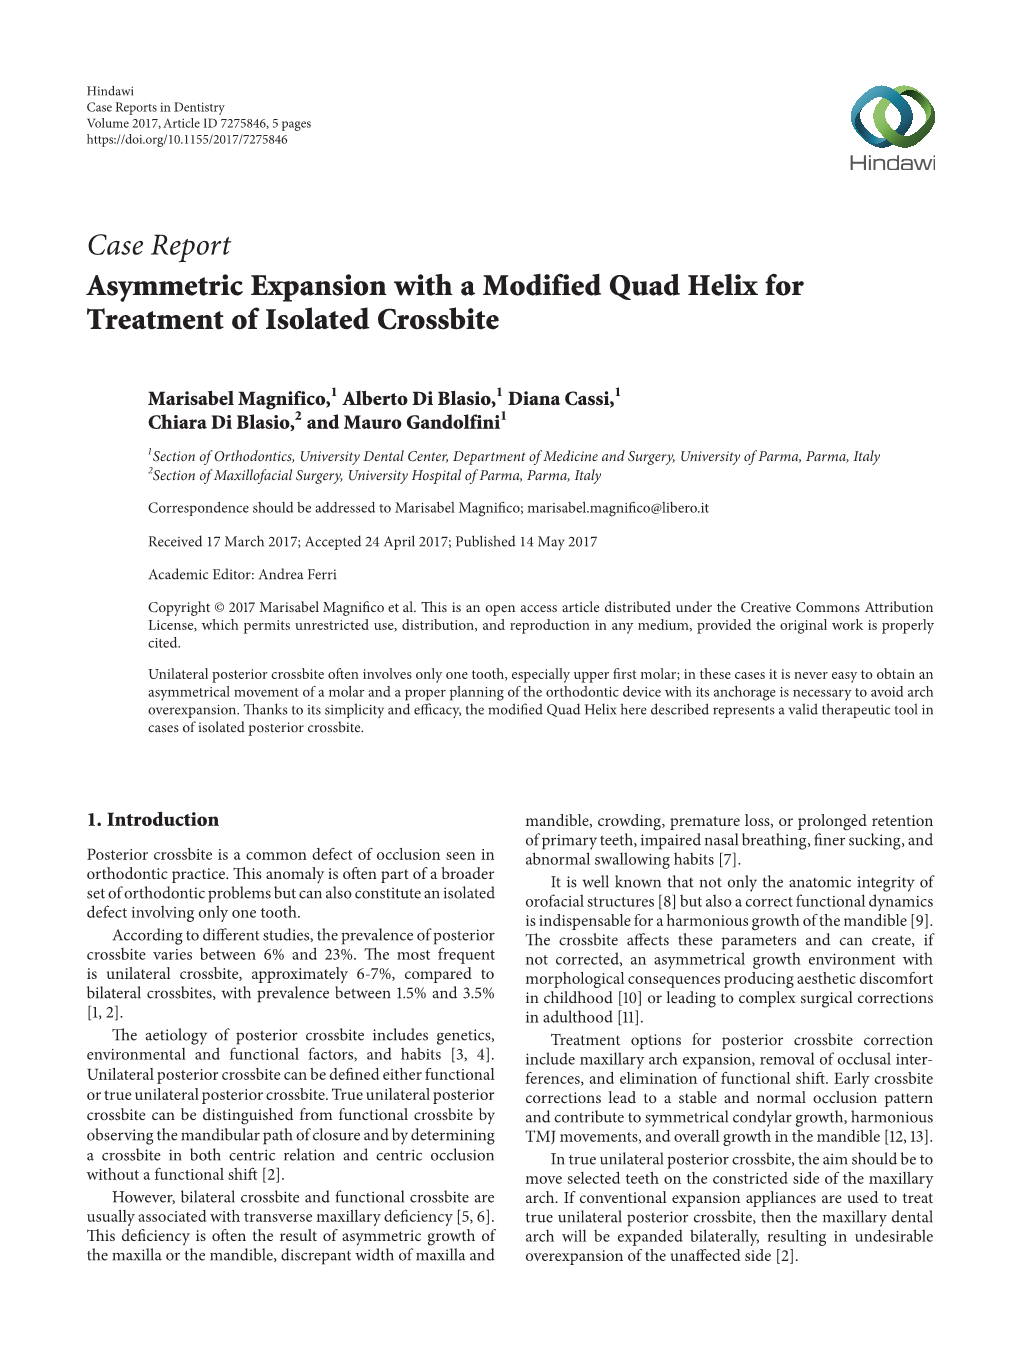 Case Report Asymmetric Expansion with a Modified Quad Helix for Treatment of Isolated Crossbite